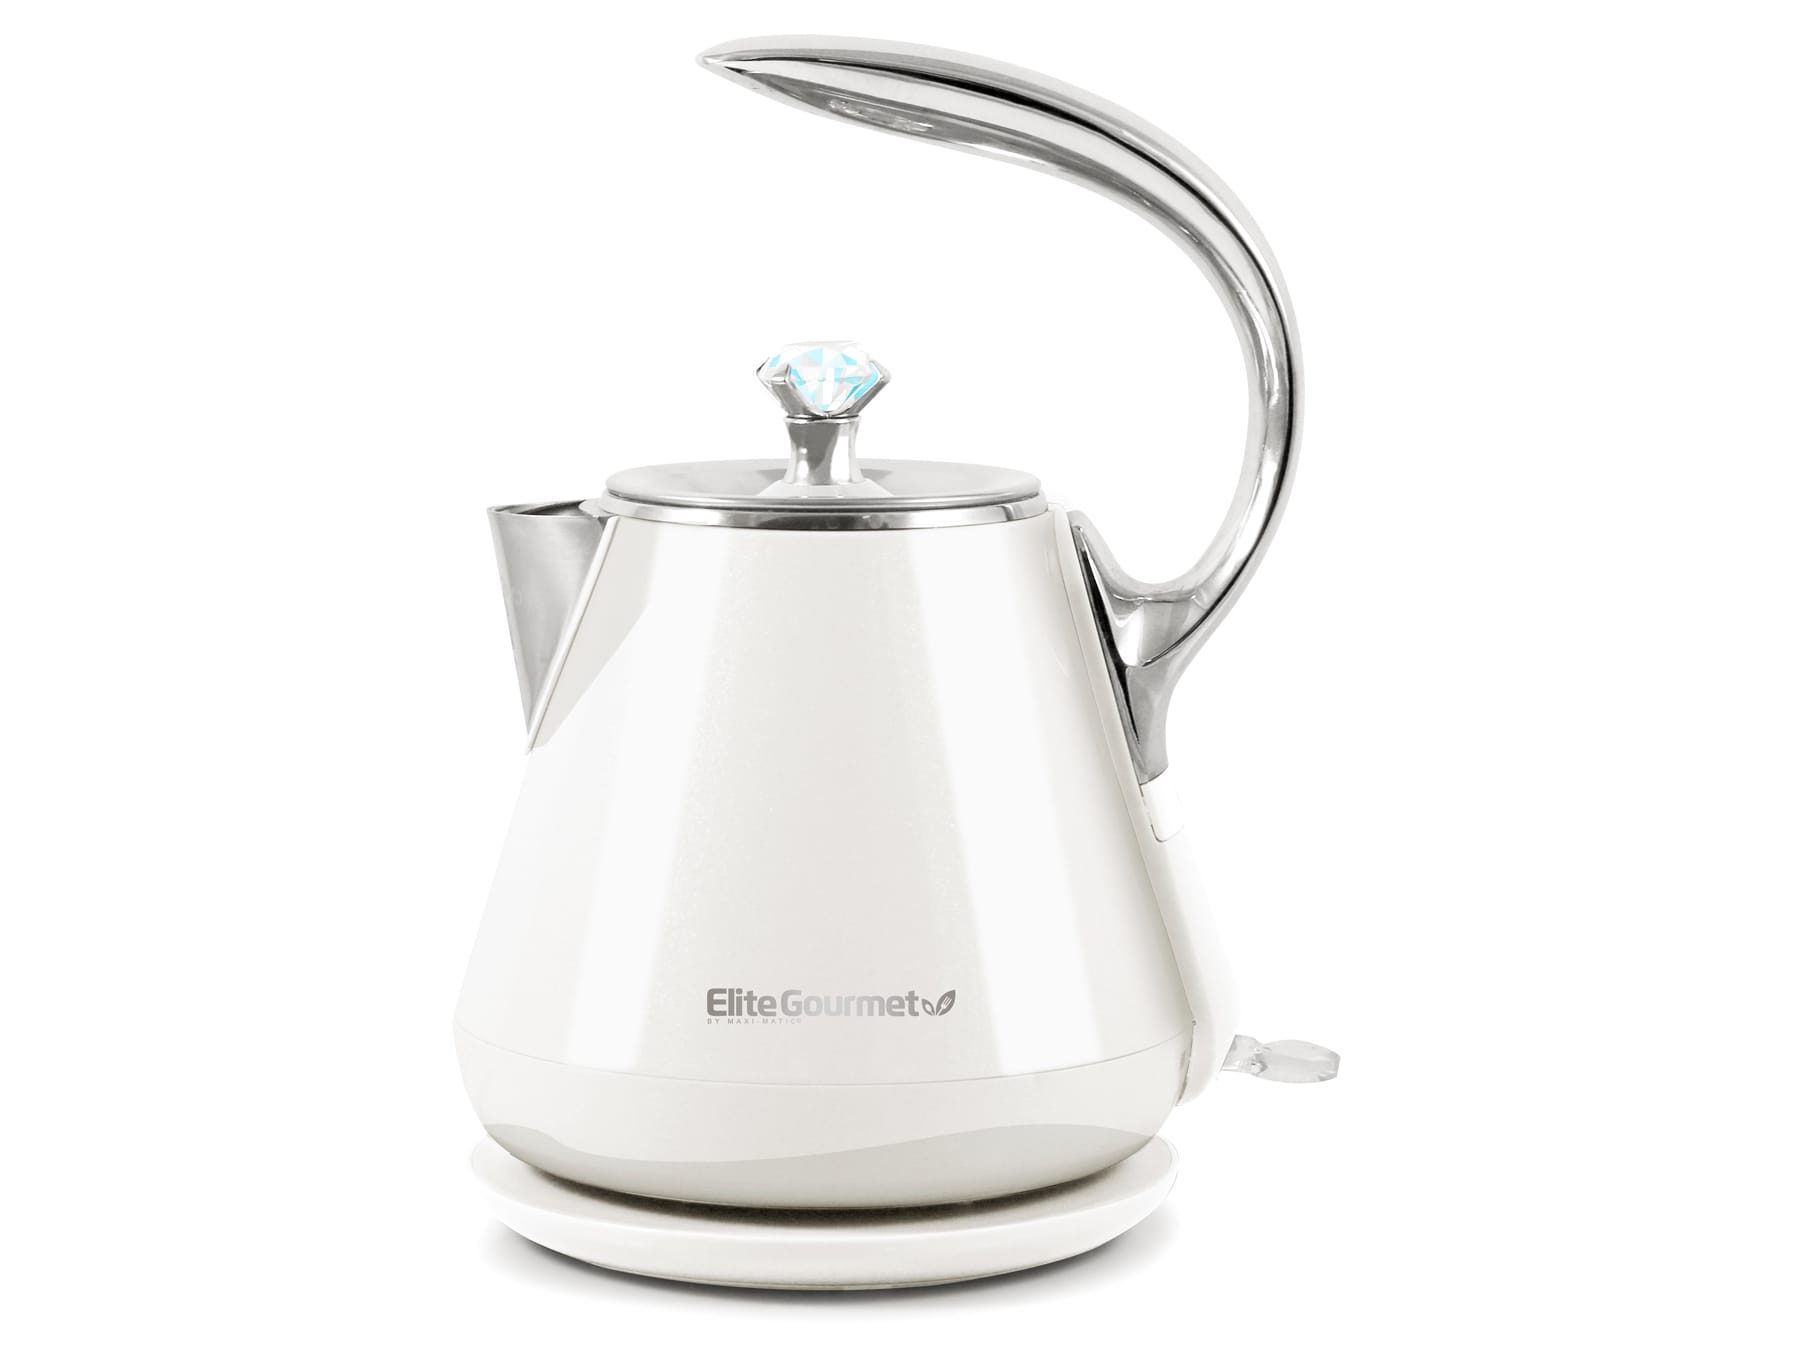 Stainless Steel 7.2 Cup Electric Kettle with 5 Presets - On Sale